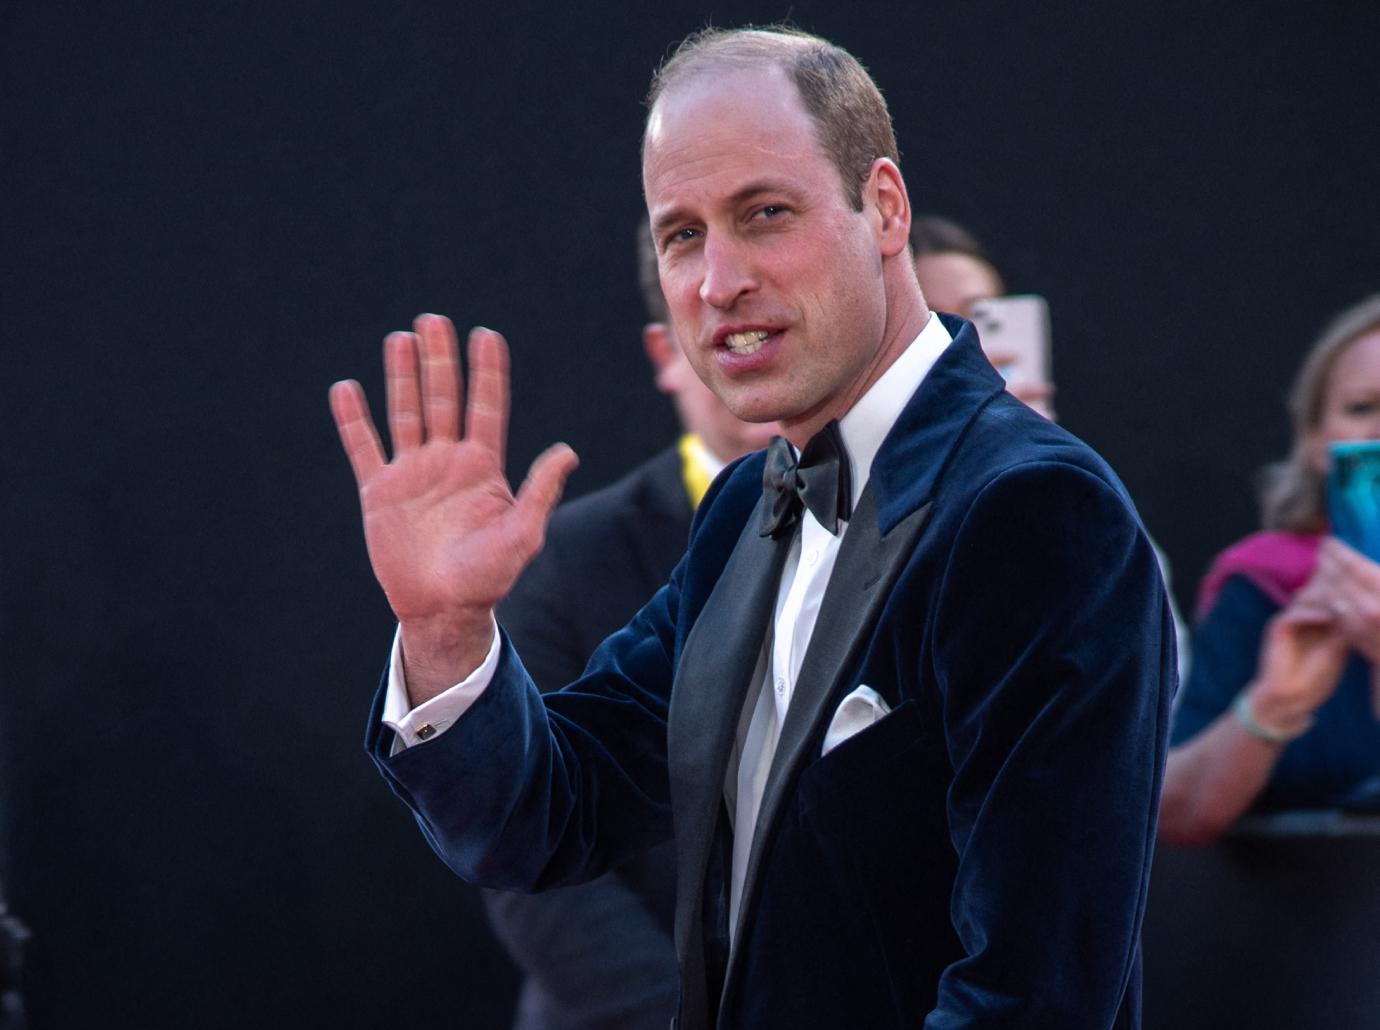 Prince William Misses Event Last Minute 'Due To A Personal Matter'